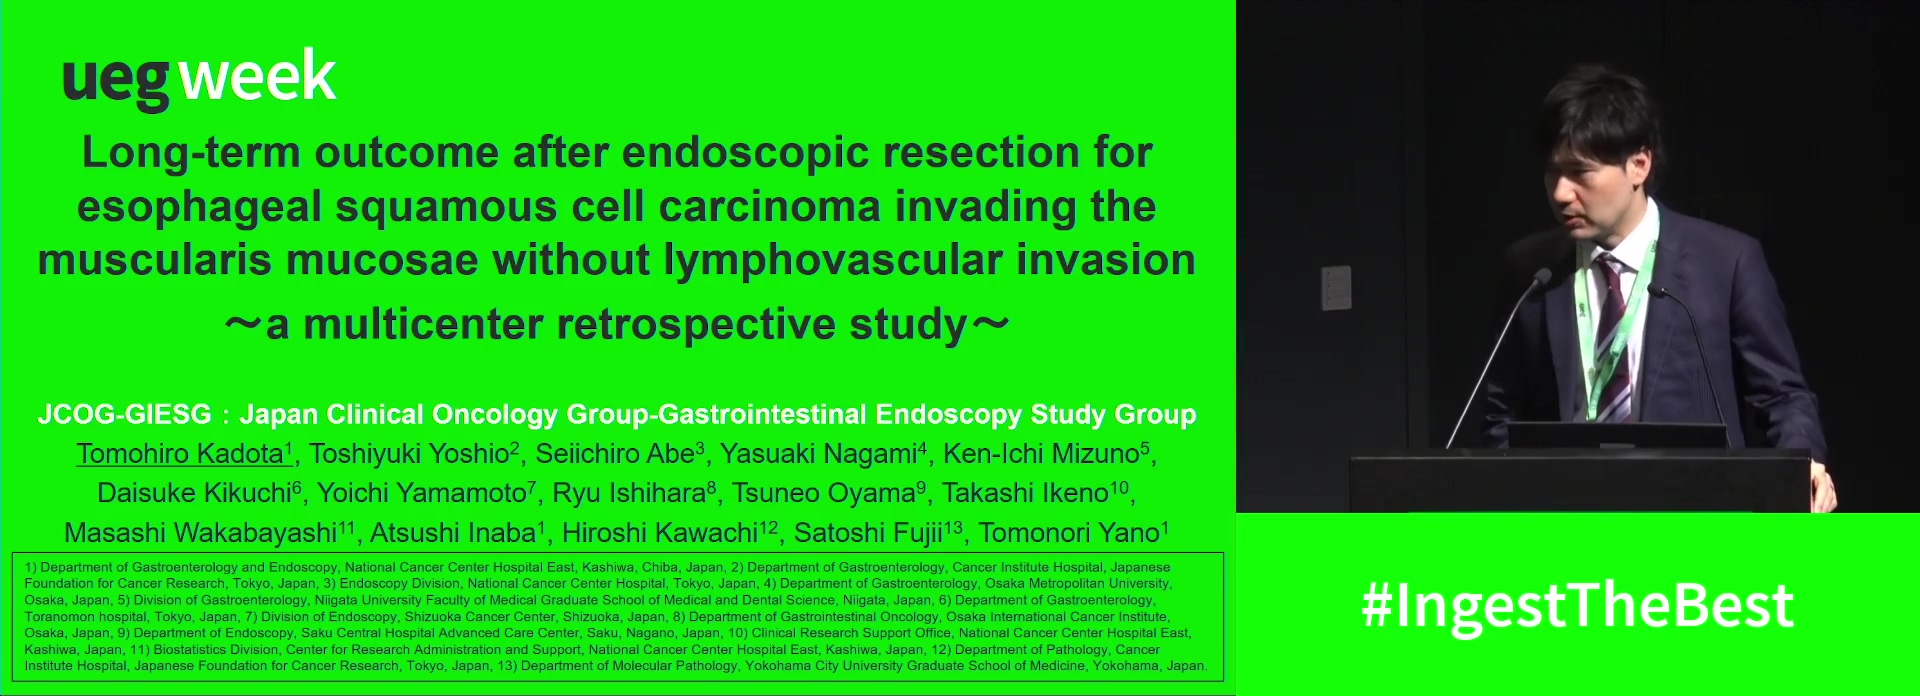 LONG-TERM OUTCOME AFTER ENDOSCOPIC RESECTION FOR ESOPHAGEAL SQUAMOUS CELL CARCINOMA INVADING THE MUSCULARIS MUCOSAE WITHOUT LYMPHOVASCULAR INVASION: A MULTICENTER RETROSPECTIVE STUDY